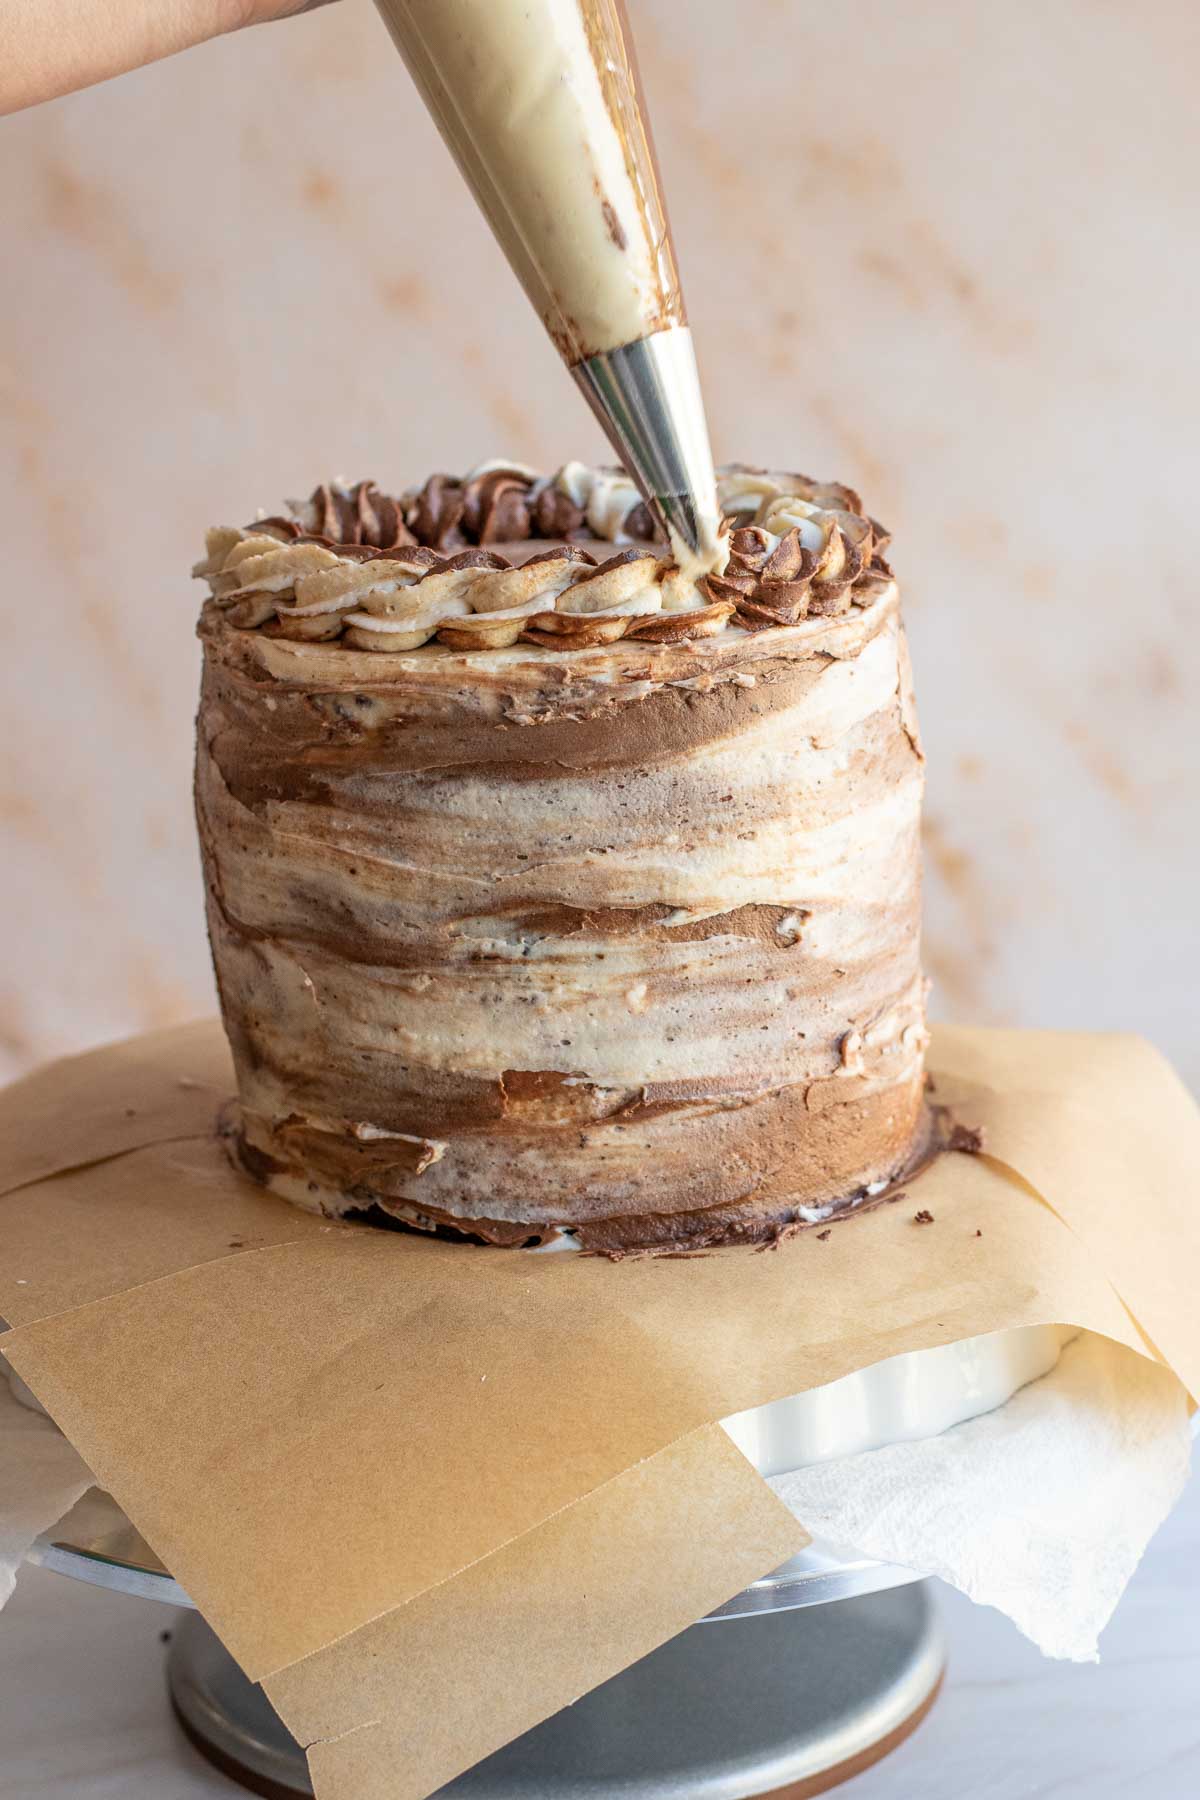 A piping tip pipes swirls onto the top of the frosted cake.